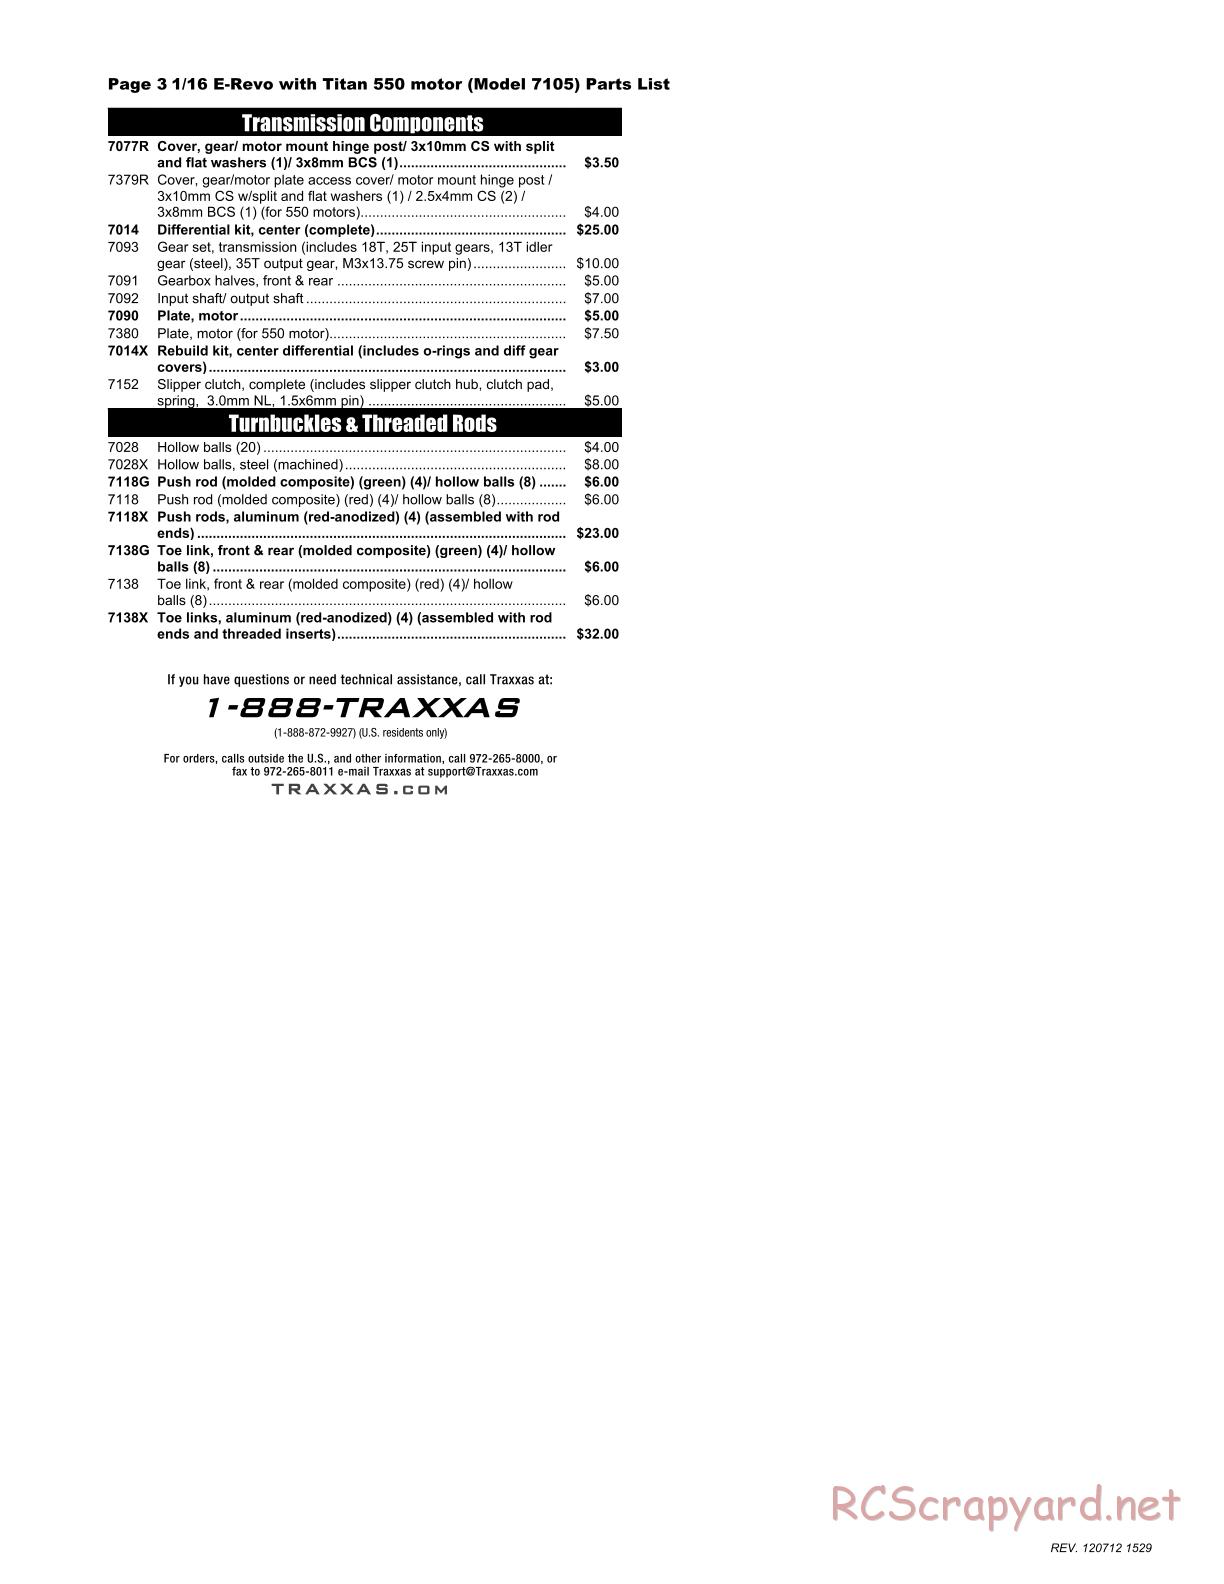 Traxxas - 1/16 E-Revo Brushed (2010) - Parts List - Page 3